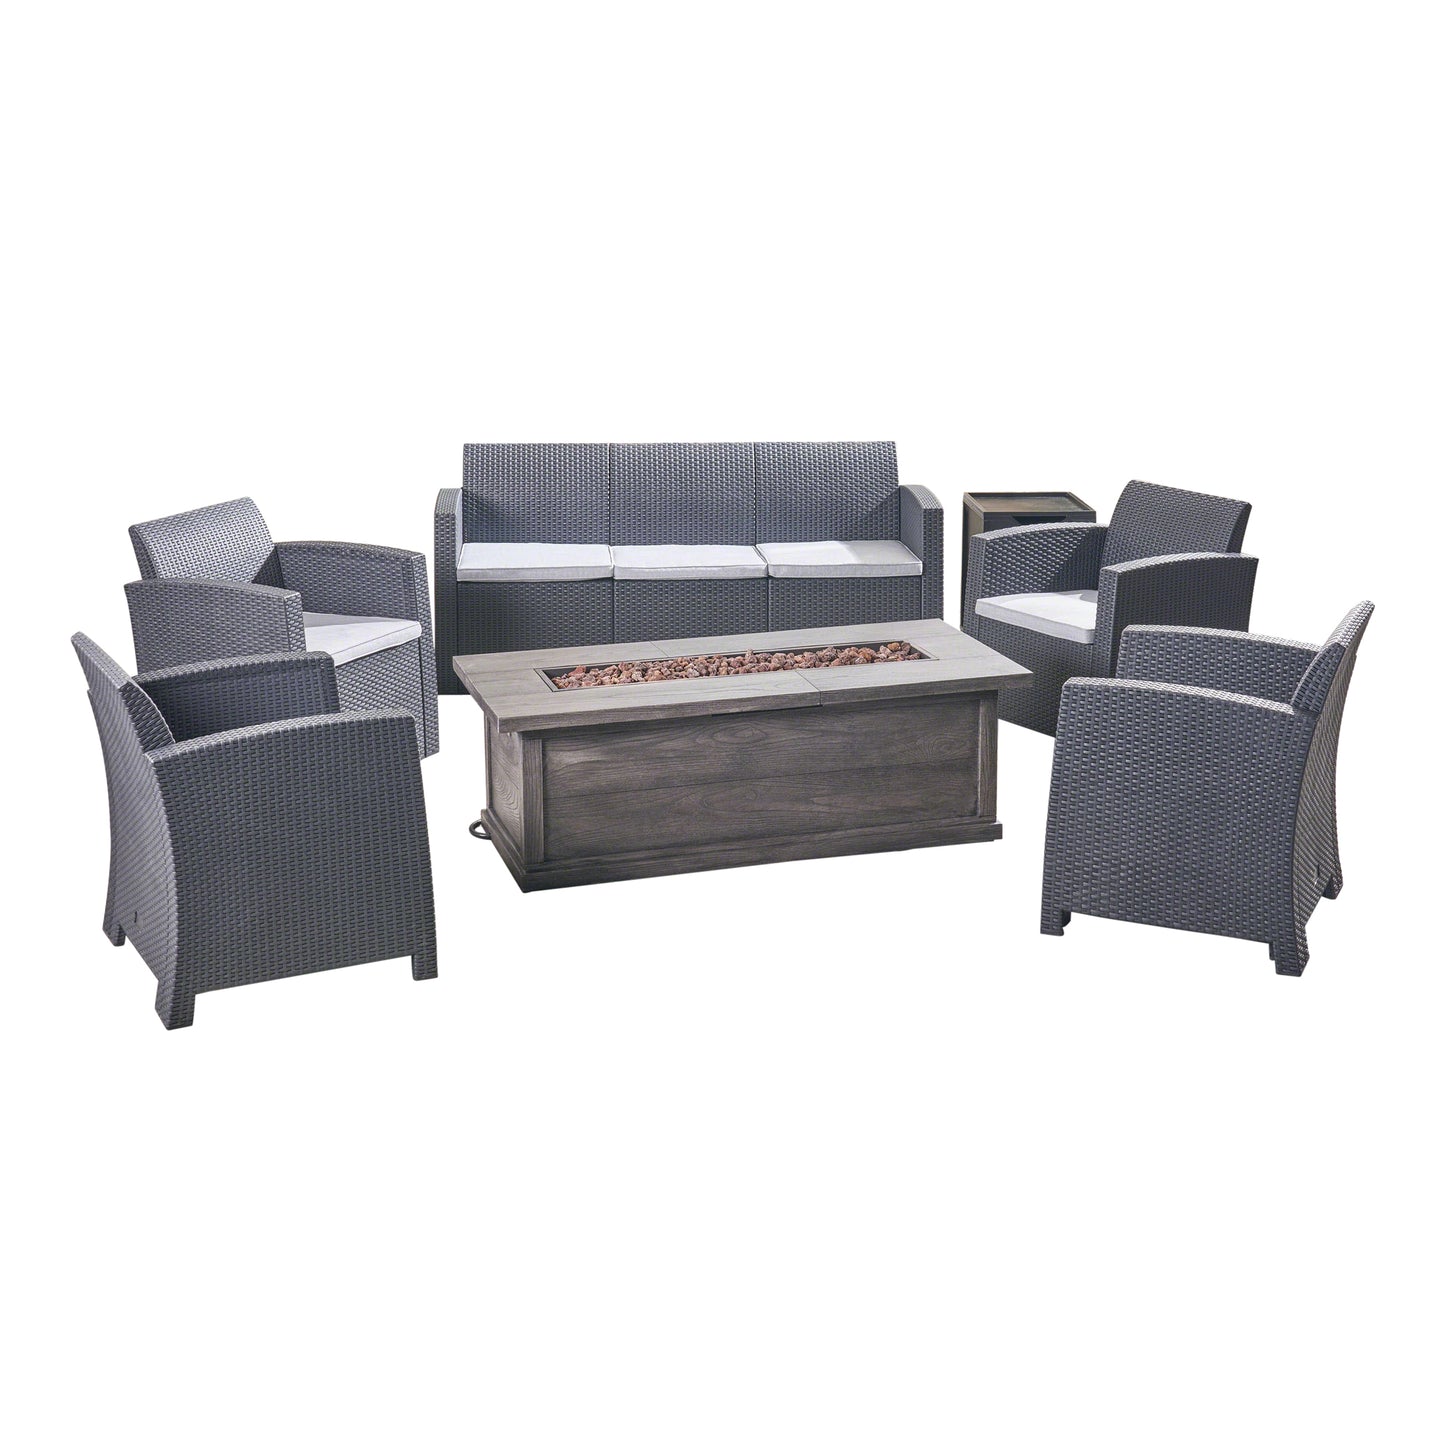 Melik Outdoor 7-Seater Wicker Print Chat Set with Fire Pit and Tank Holder